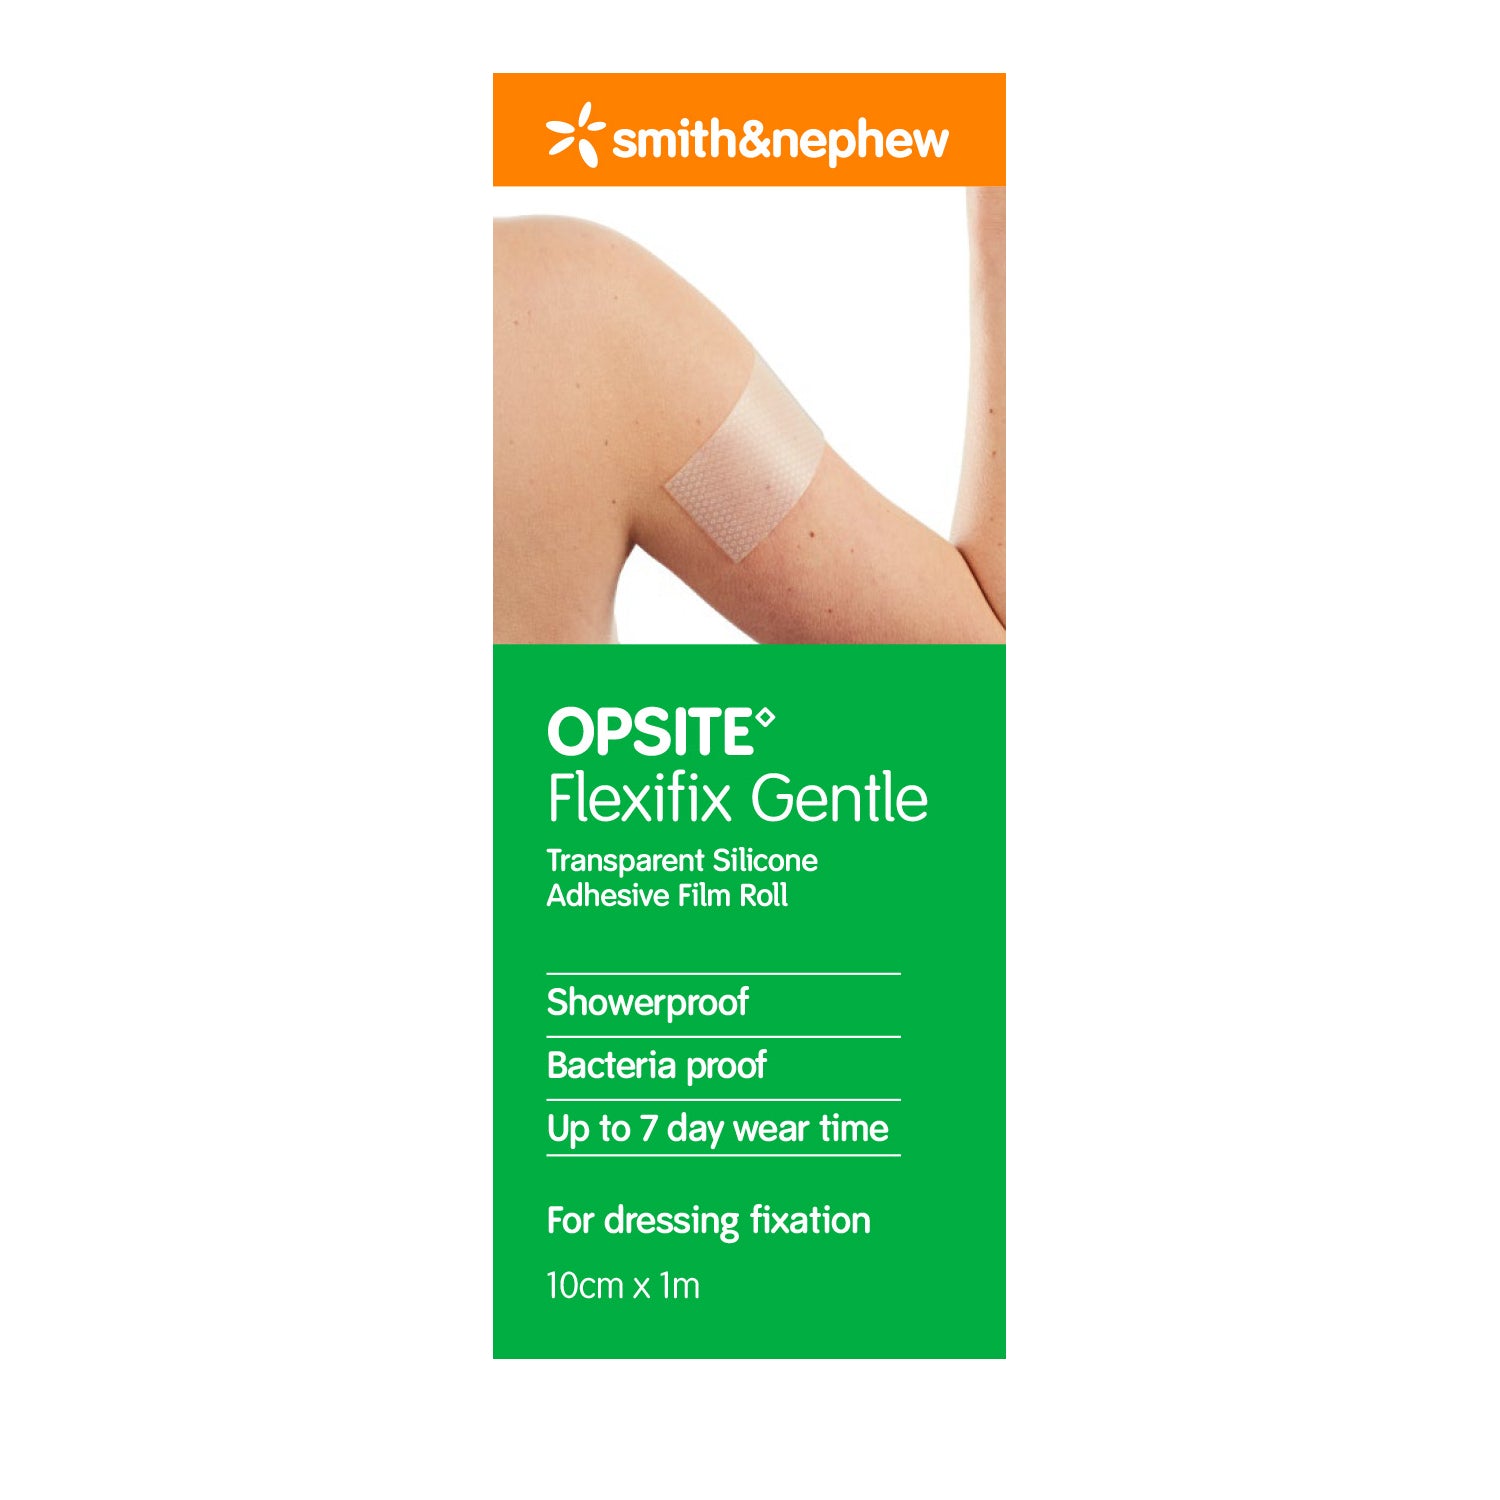 Smith & Nephew OPSITE Flexifix Gentle Transparent Silicone Adhesive Film Roll